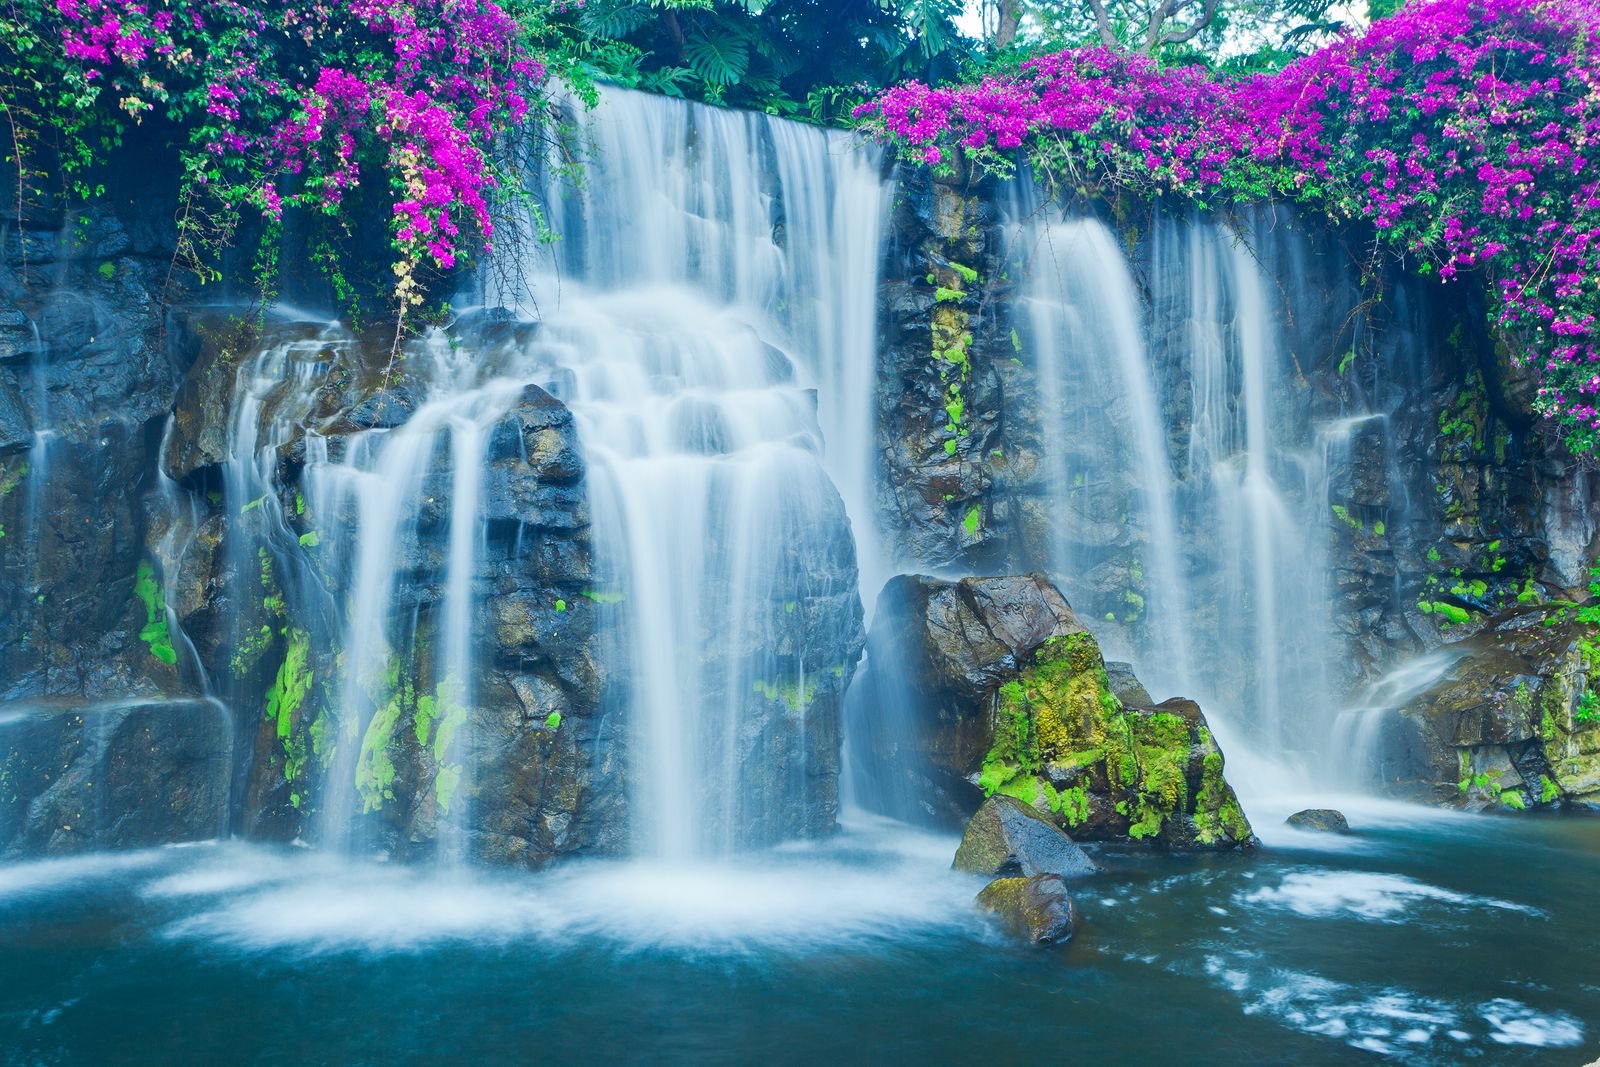 A waterfall of flowers